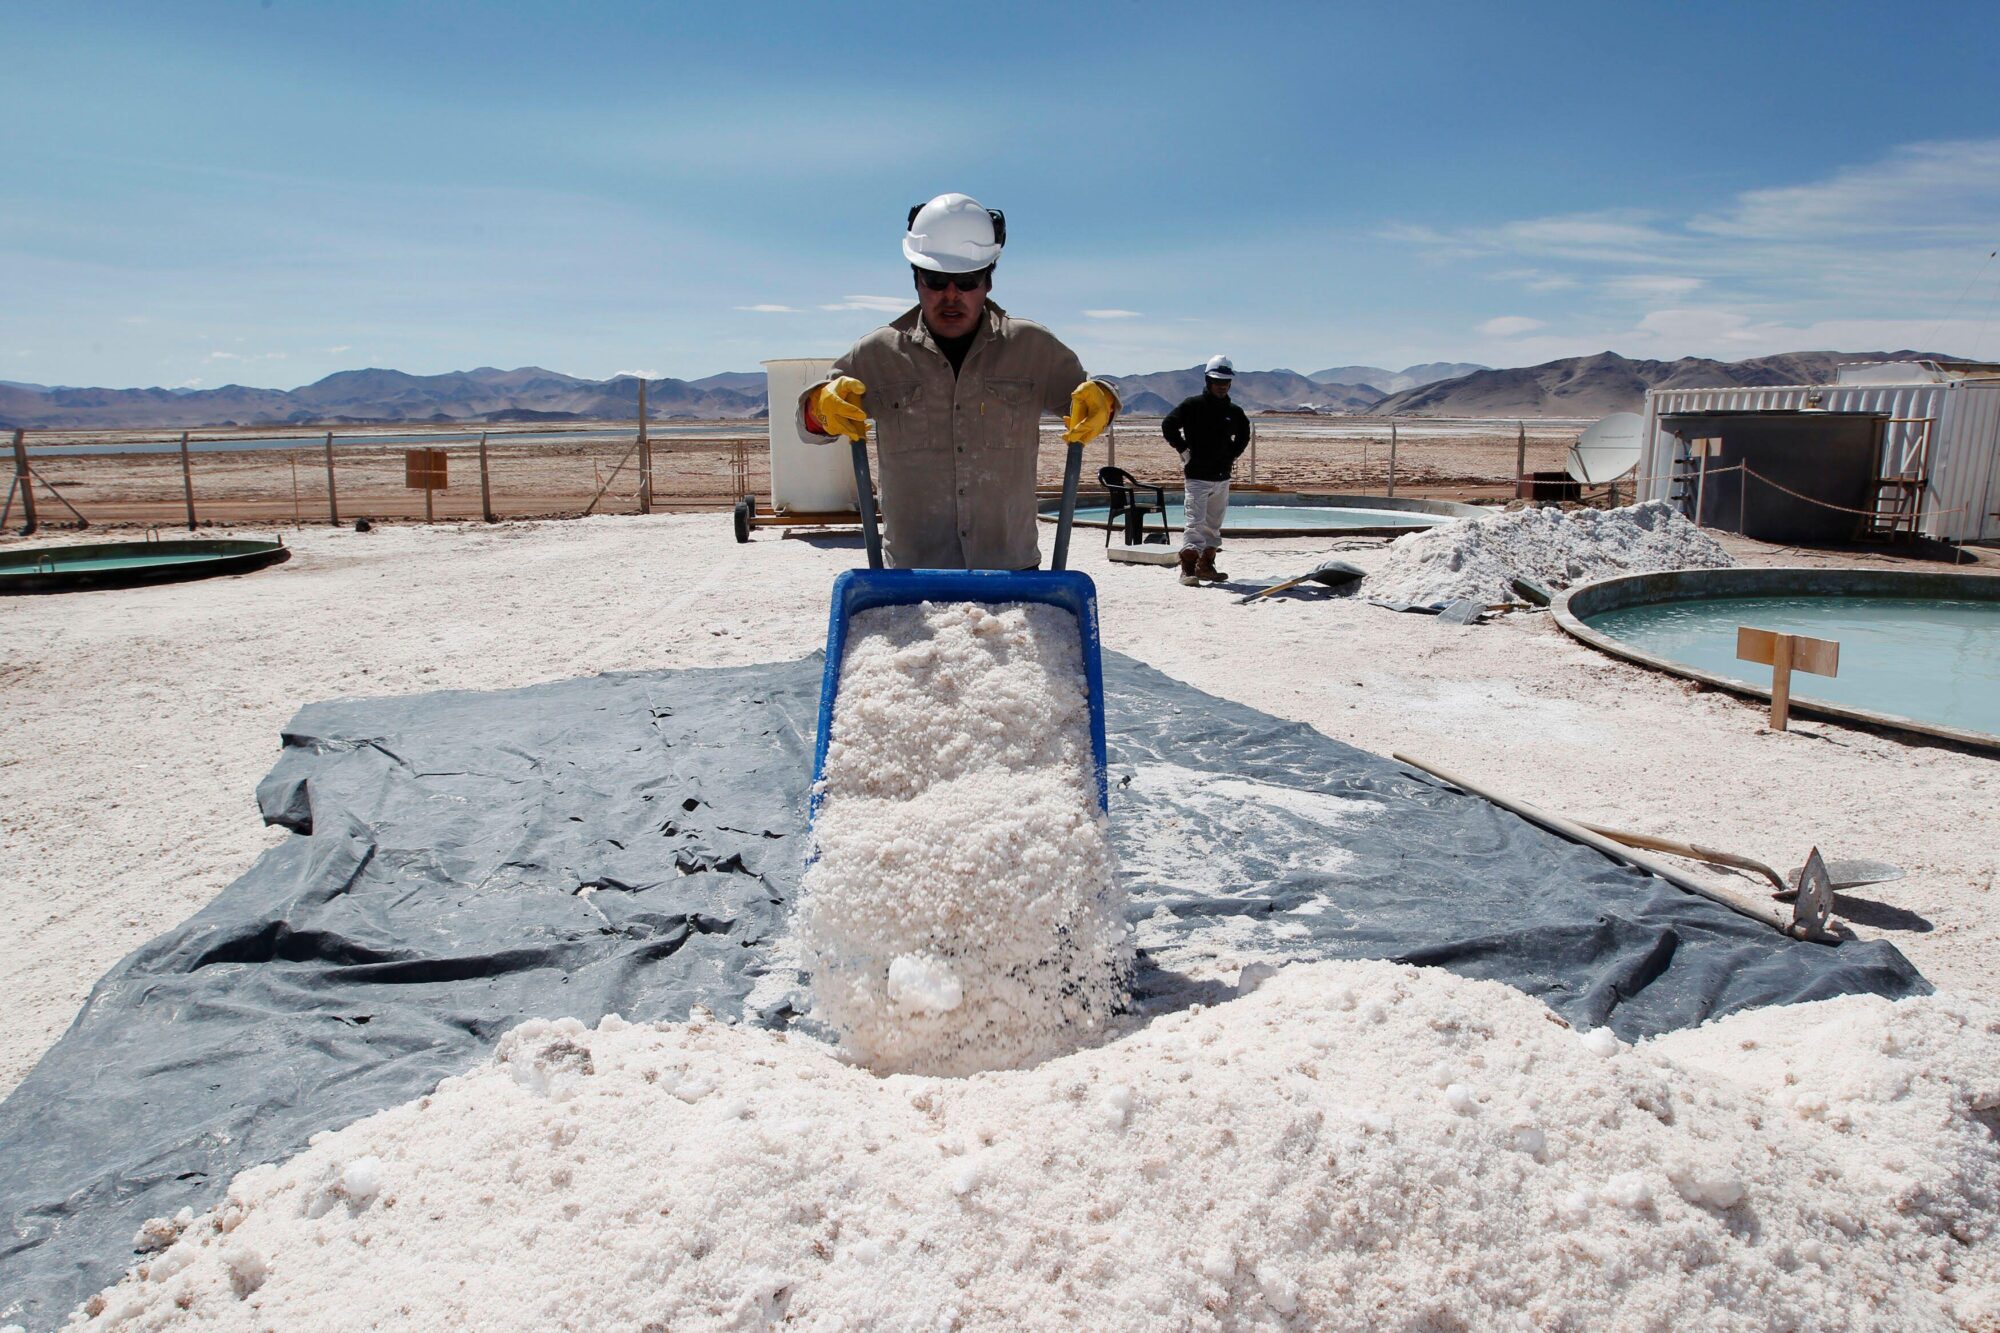 <p>Production continues at the Salar del Hombre Muerto salt flat in northern Argentina. Lithium could bring a huge boost to economies, but social and environmental challenges exist around mining sites. (Image: Enrique Marcarian / Alamy)</p>